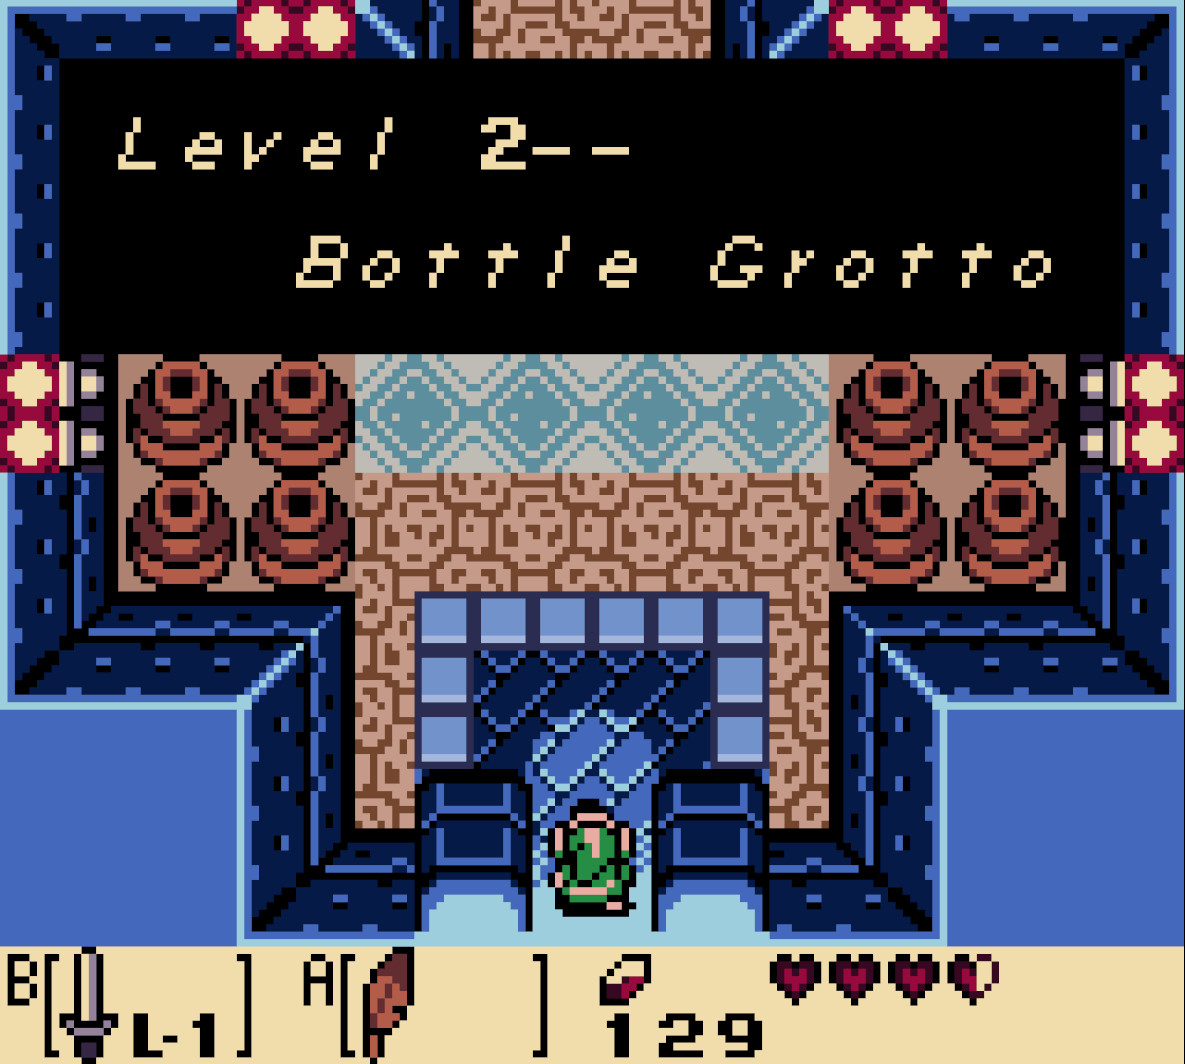 The entrance to bottle grotto